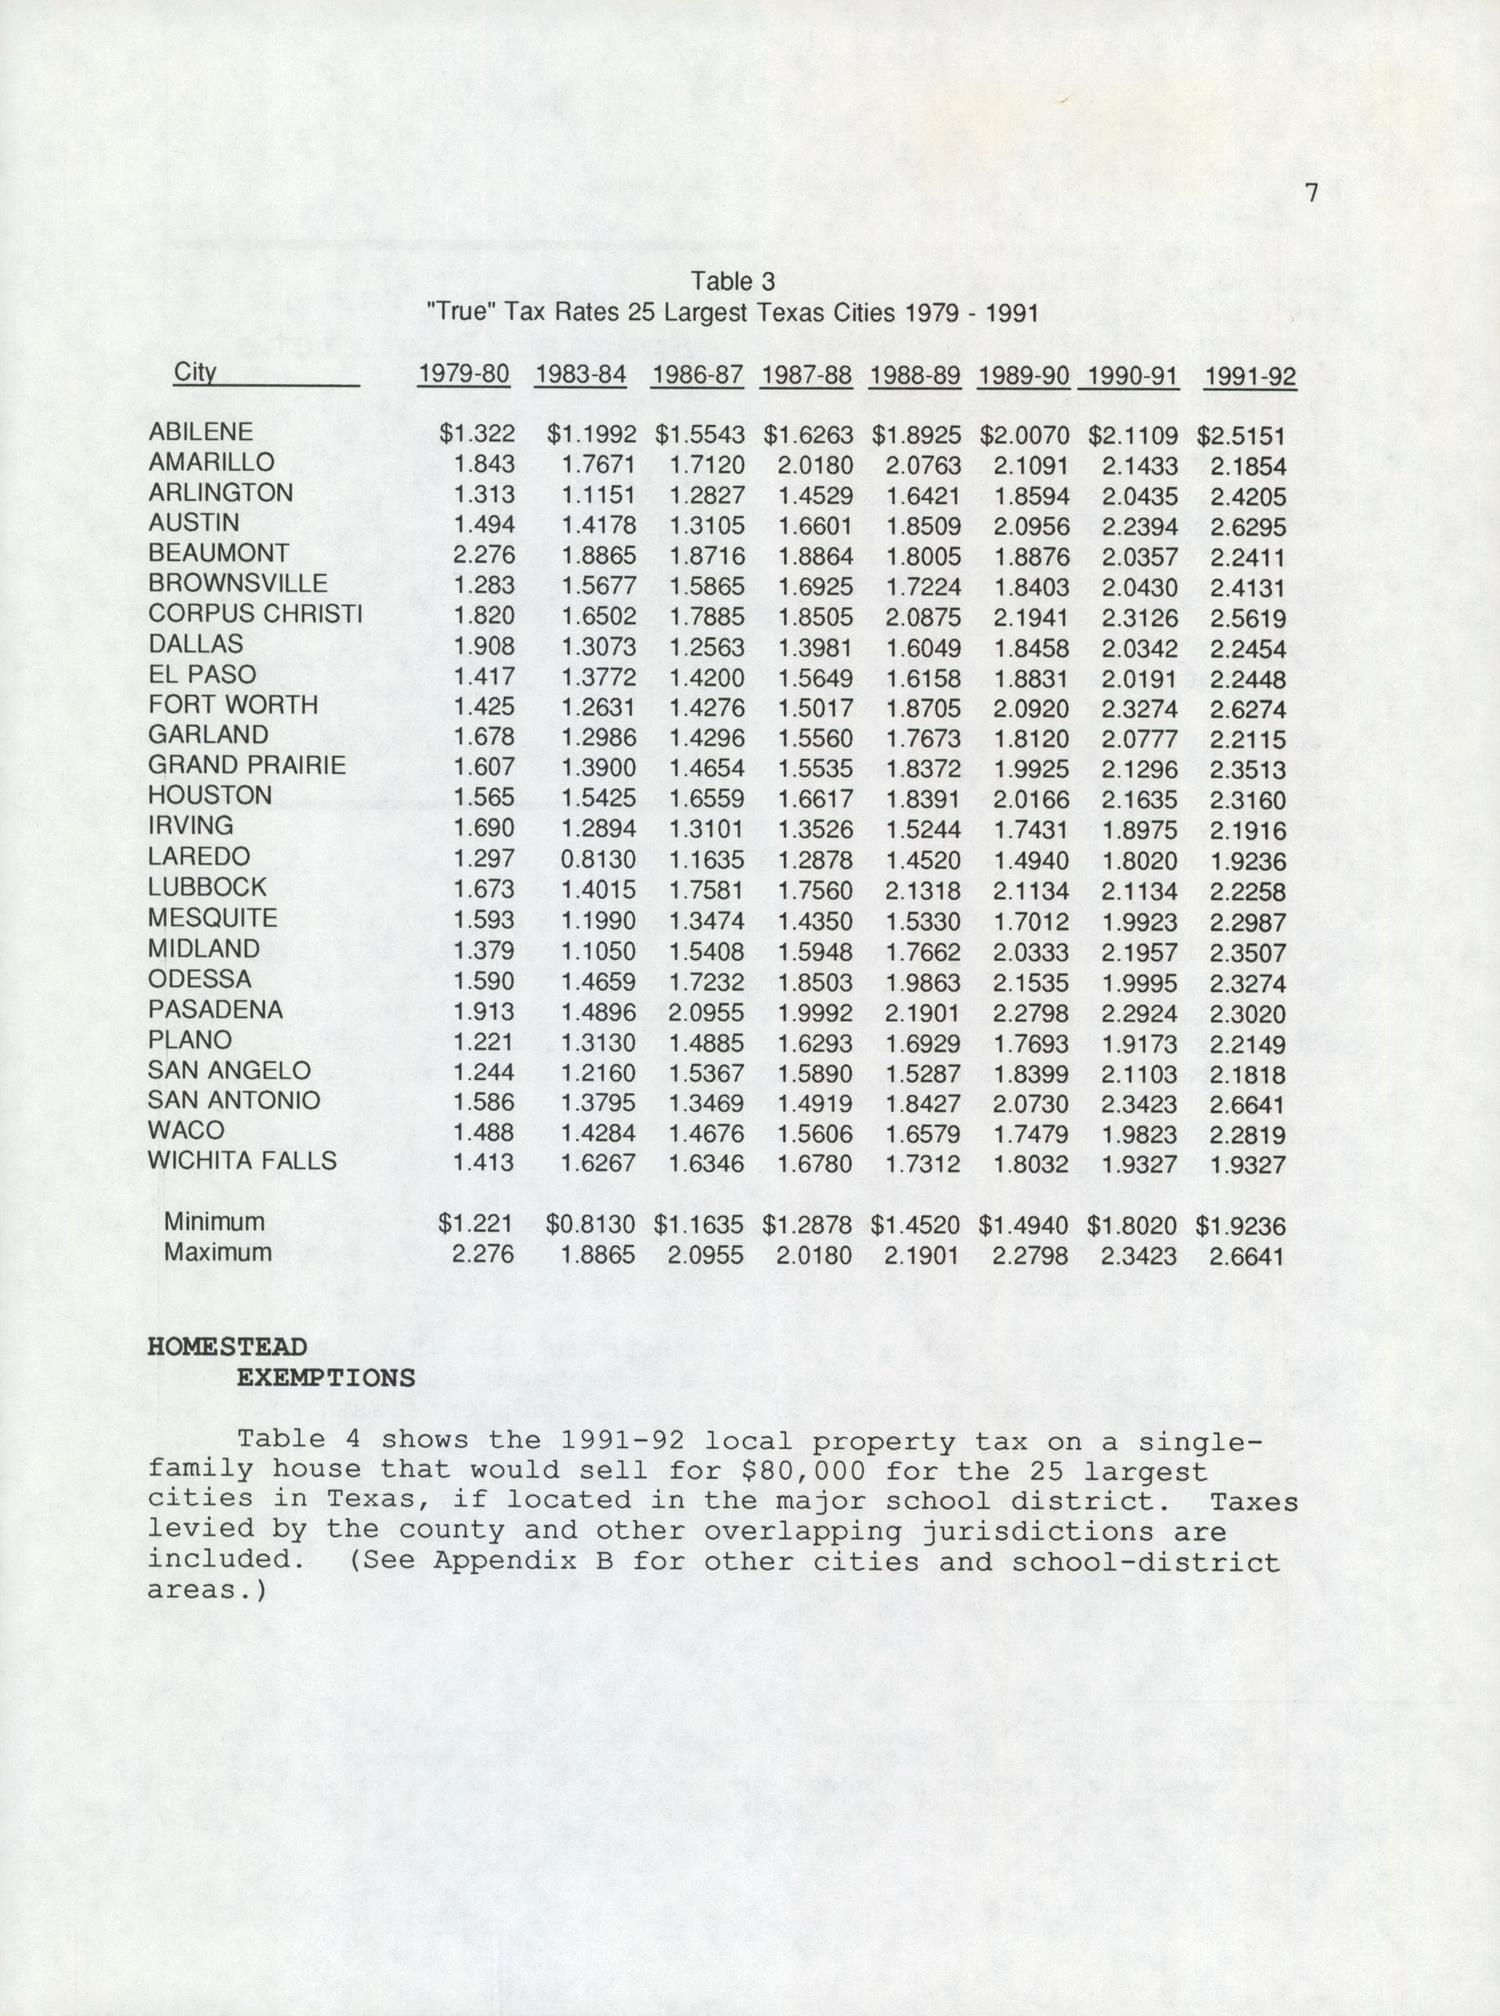 Appraisal Practices of Texas School Districts and Counties:1993
                                                
                                                    7
                                                